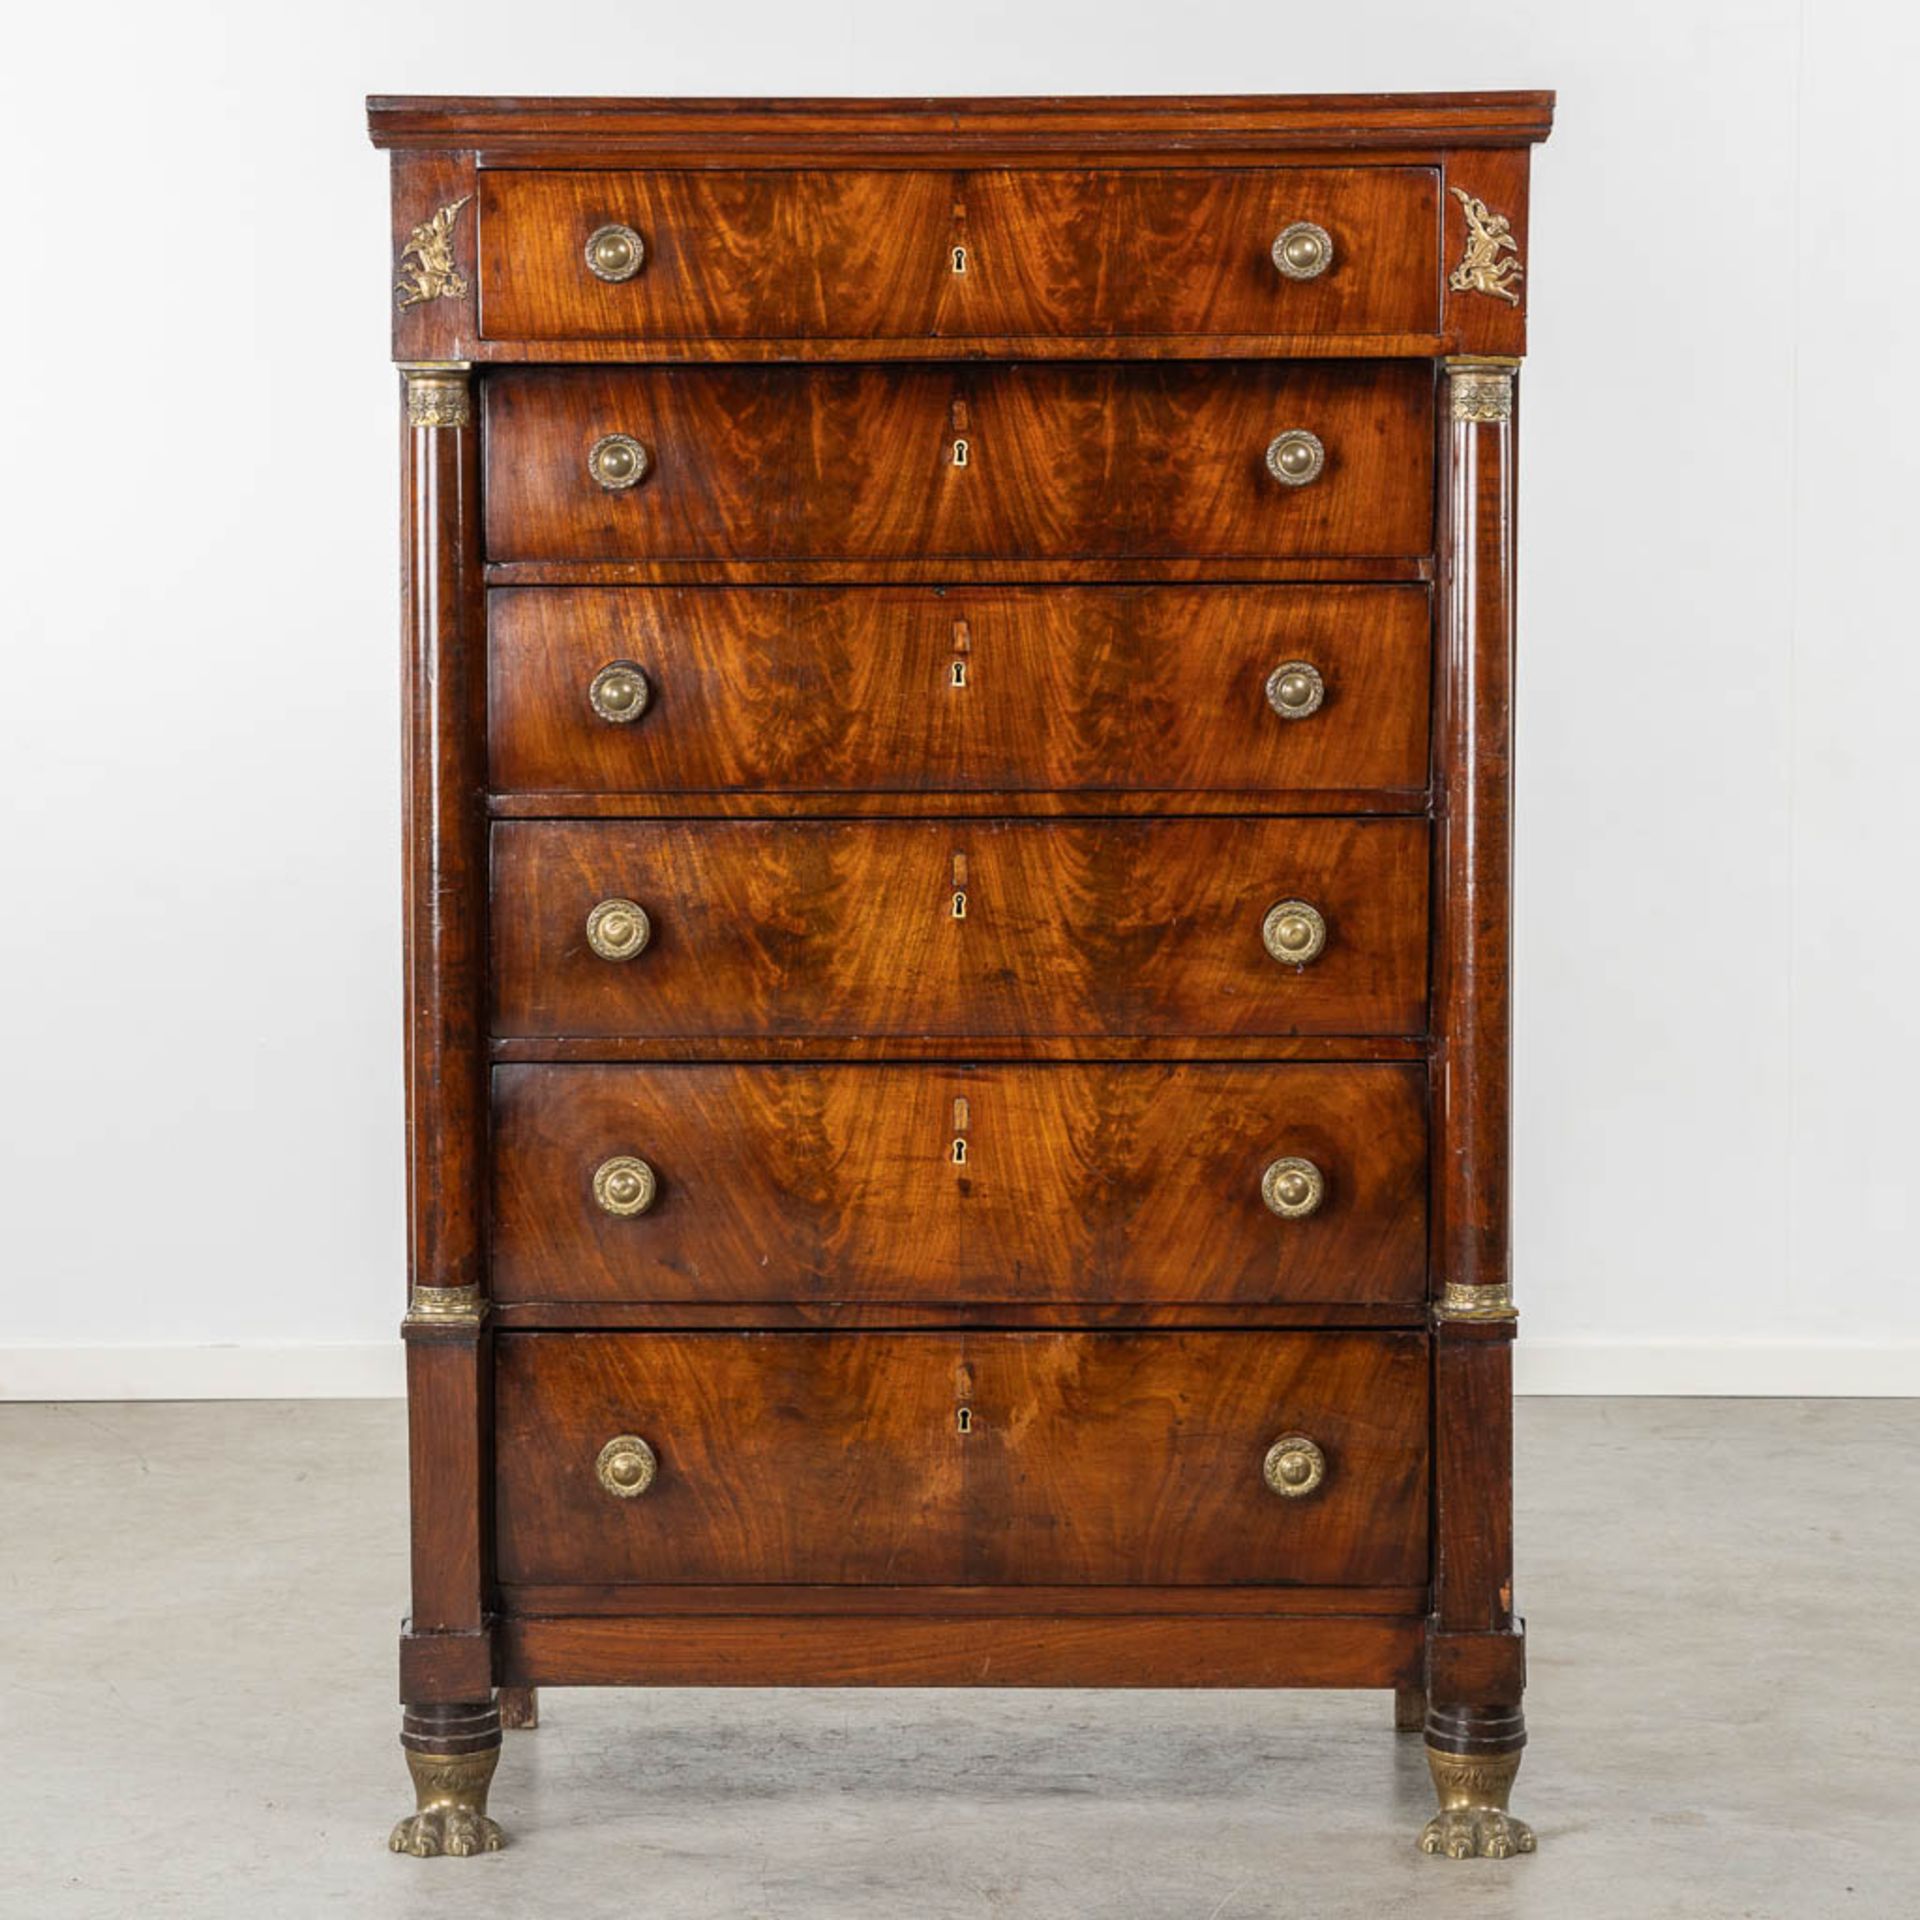 A 6-drawer cabinet, rosewood veneer mounted with bronze. Empire period, 19th C. (L:50 x W:100 x H:15 - Image 4 of 15